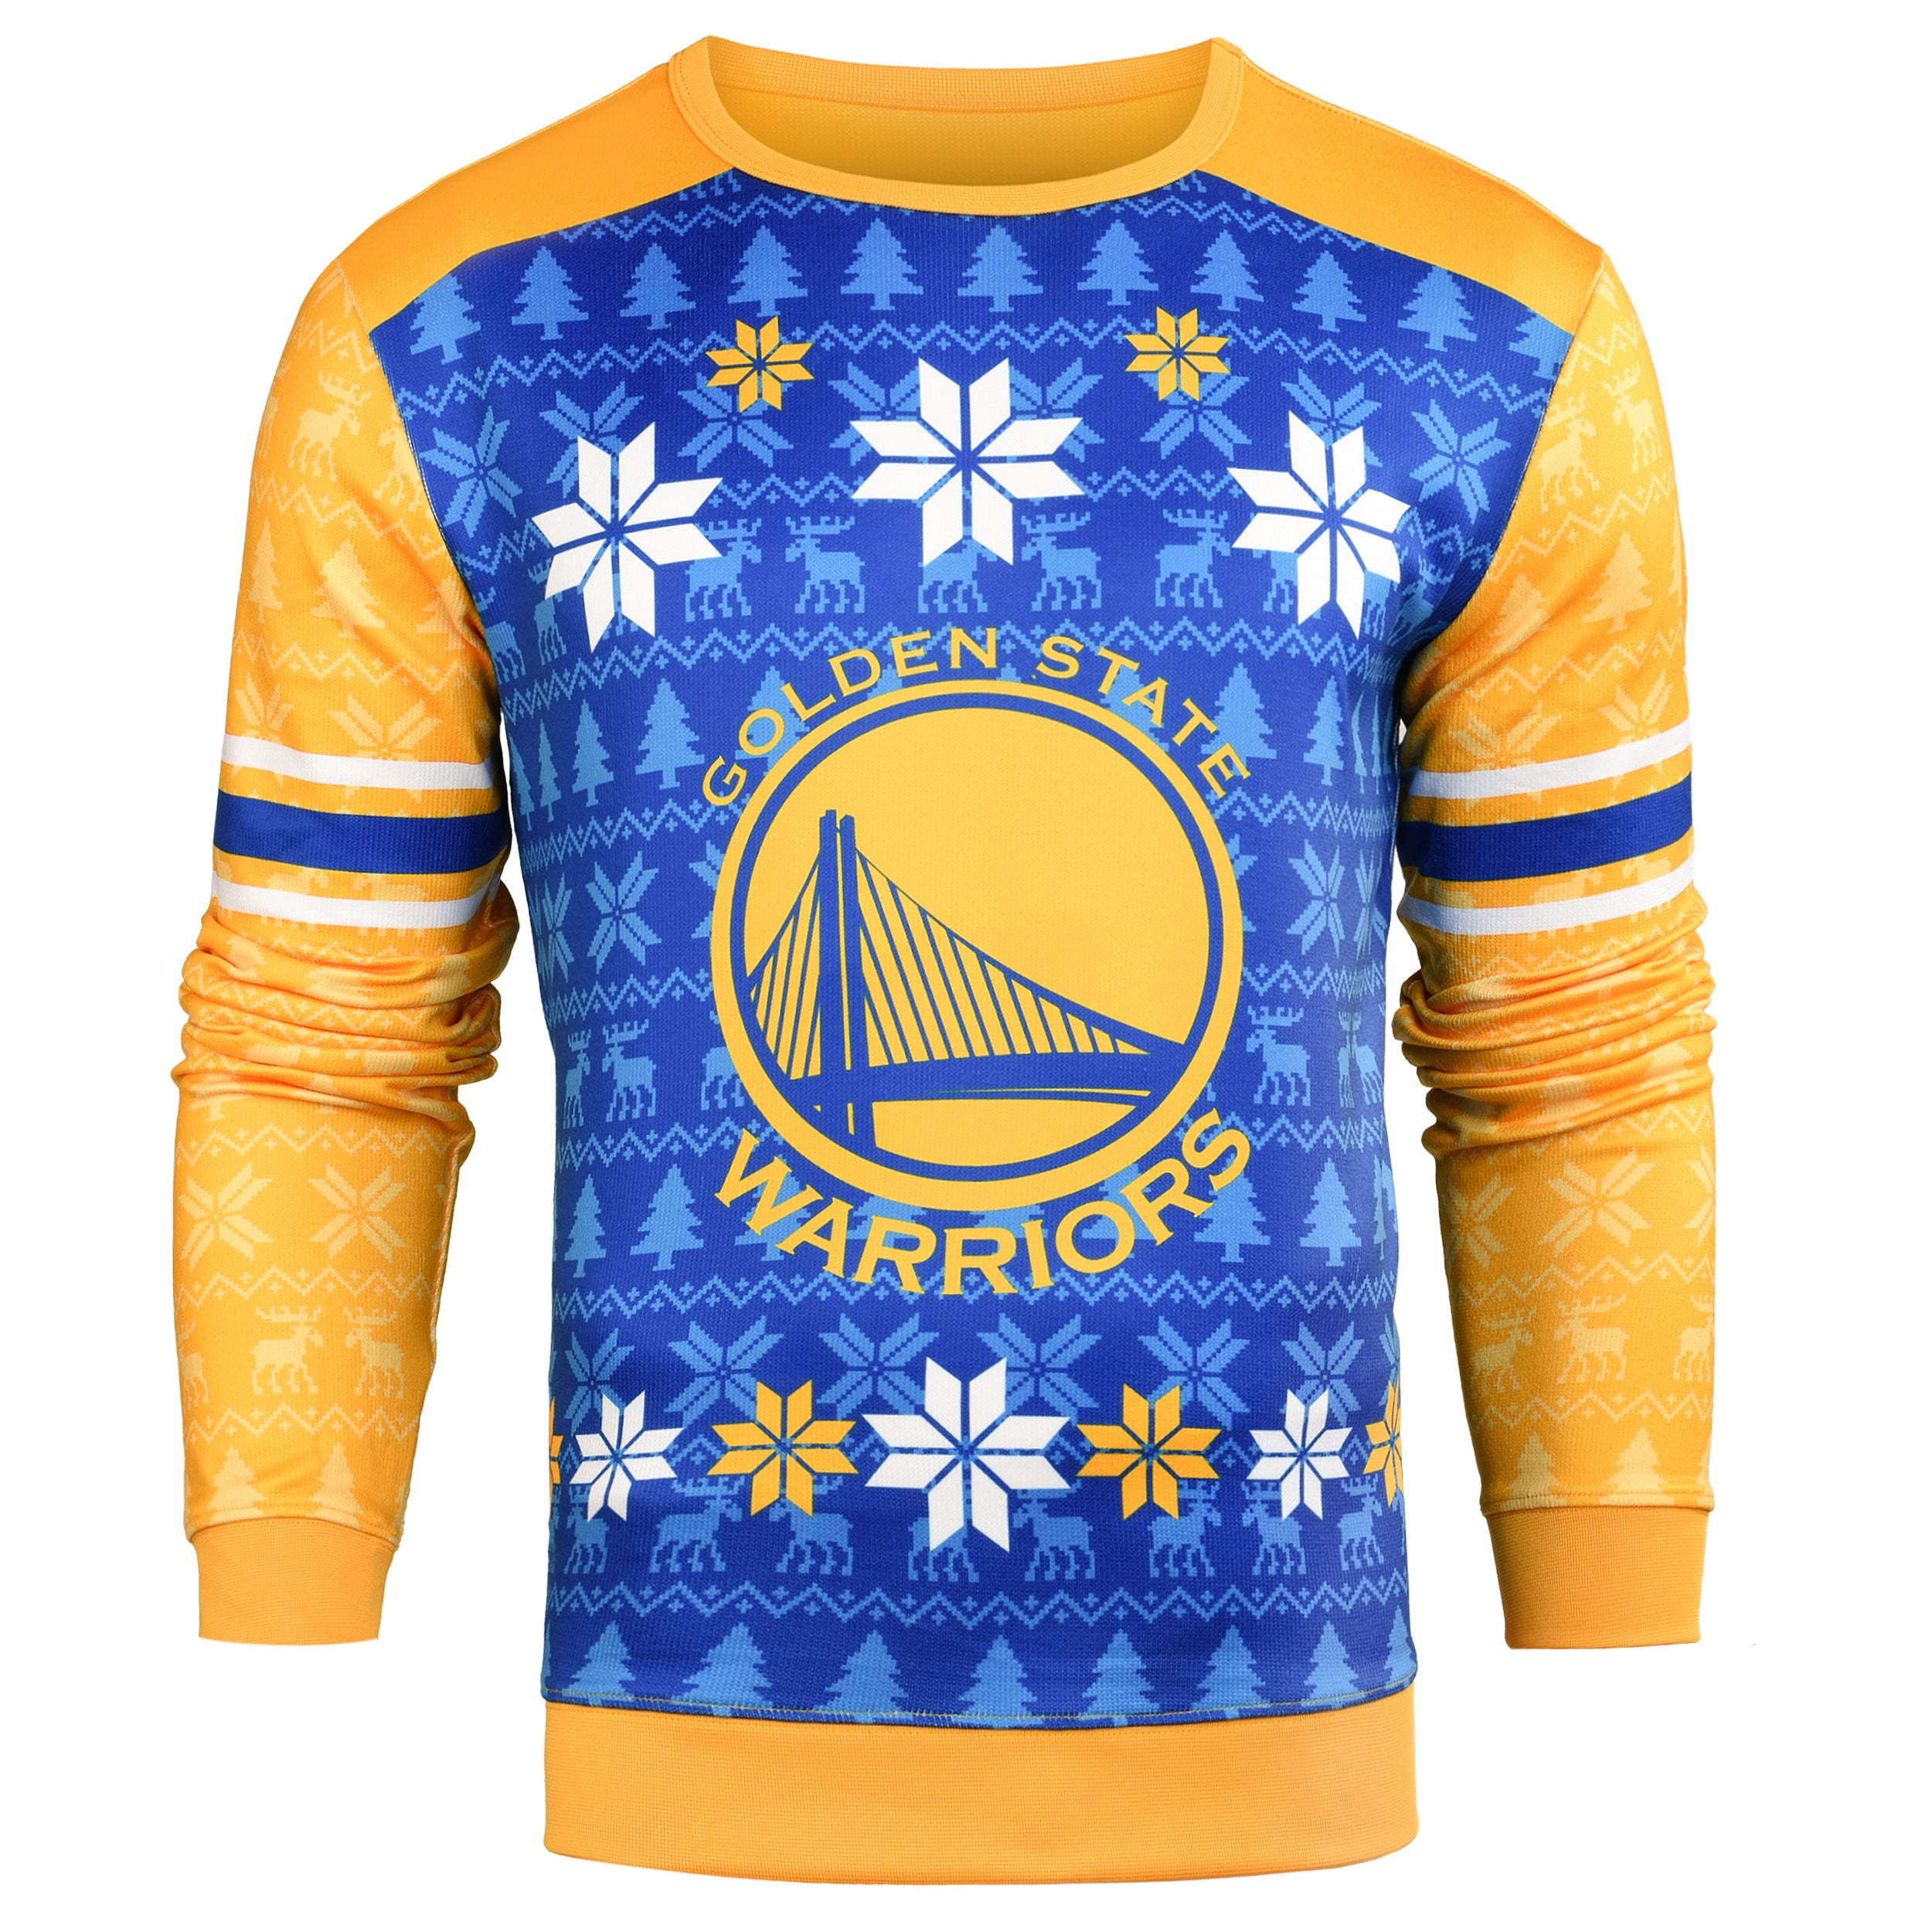 Golden State Warrior NBA Finnals Champions Ugly Christmas Sweater -  Reallgraphics